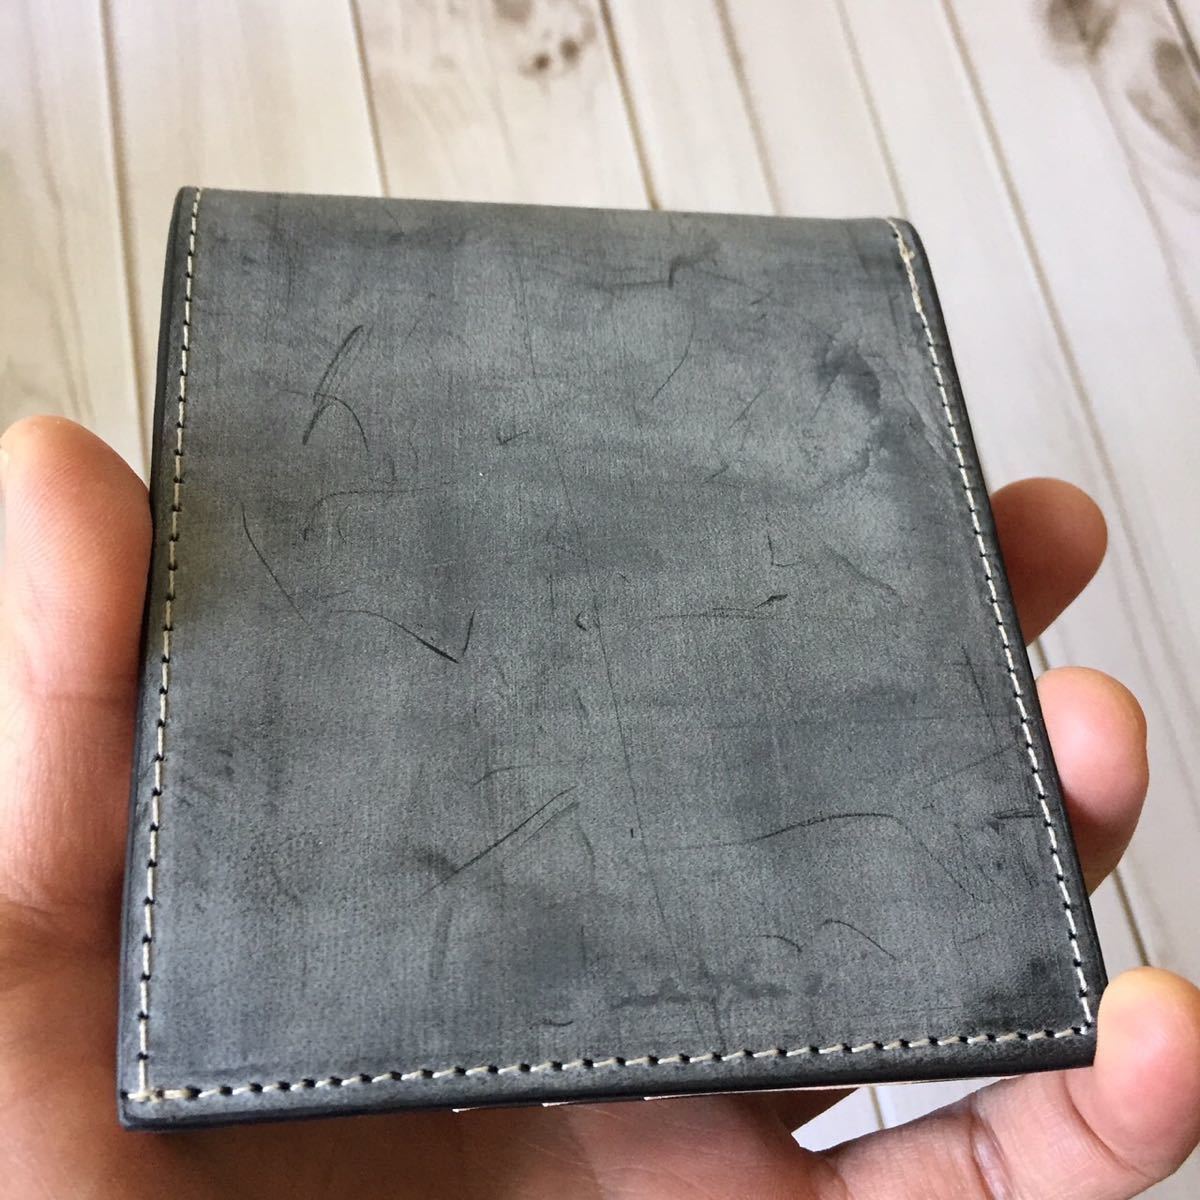  new work goods black hand made new goods b ride leather cow leather original leather compact Mini purse folding twice purse change purse . equipped popular commodity 